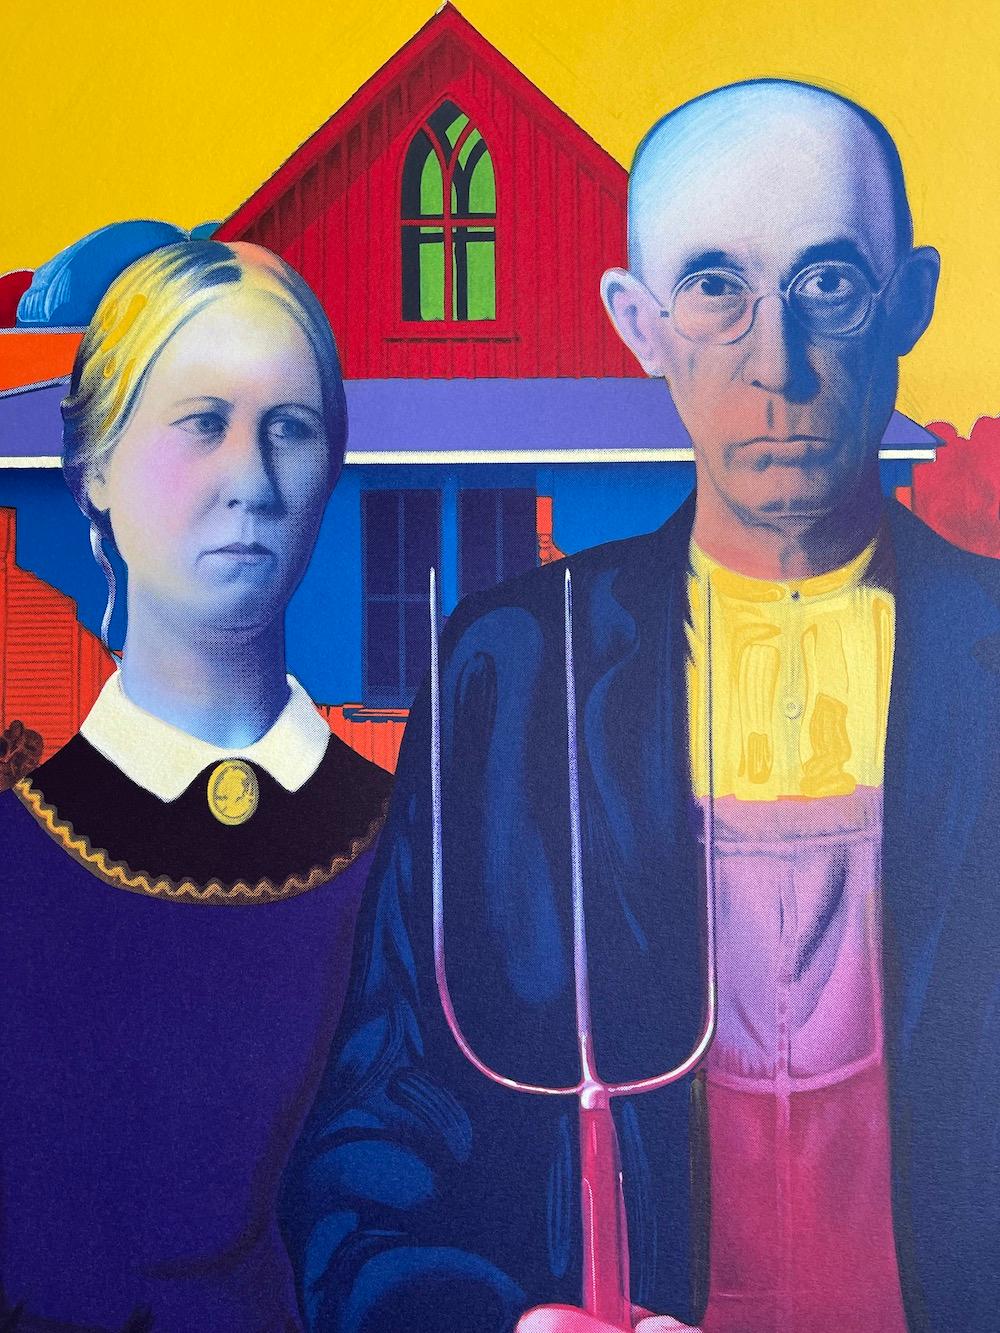 AMERICAN GOTHIC Lithograph Pop Portrait, Midwest Couple, Carpenter Gothic House  - Print by Peter Max